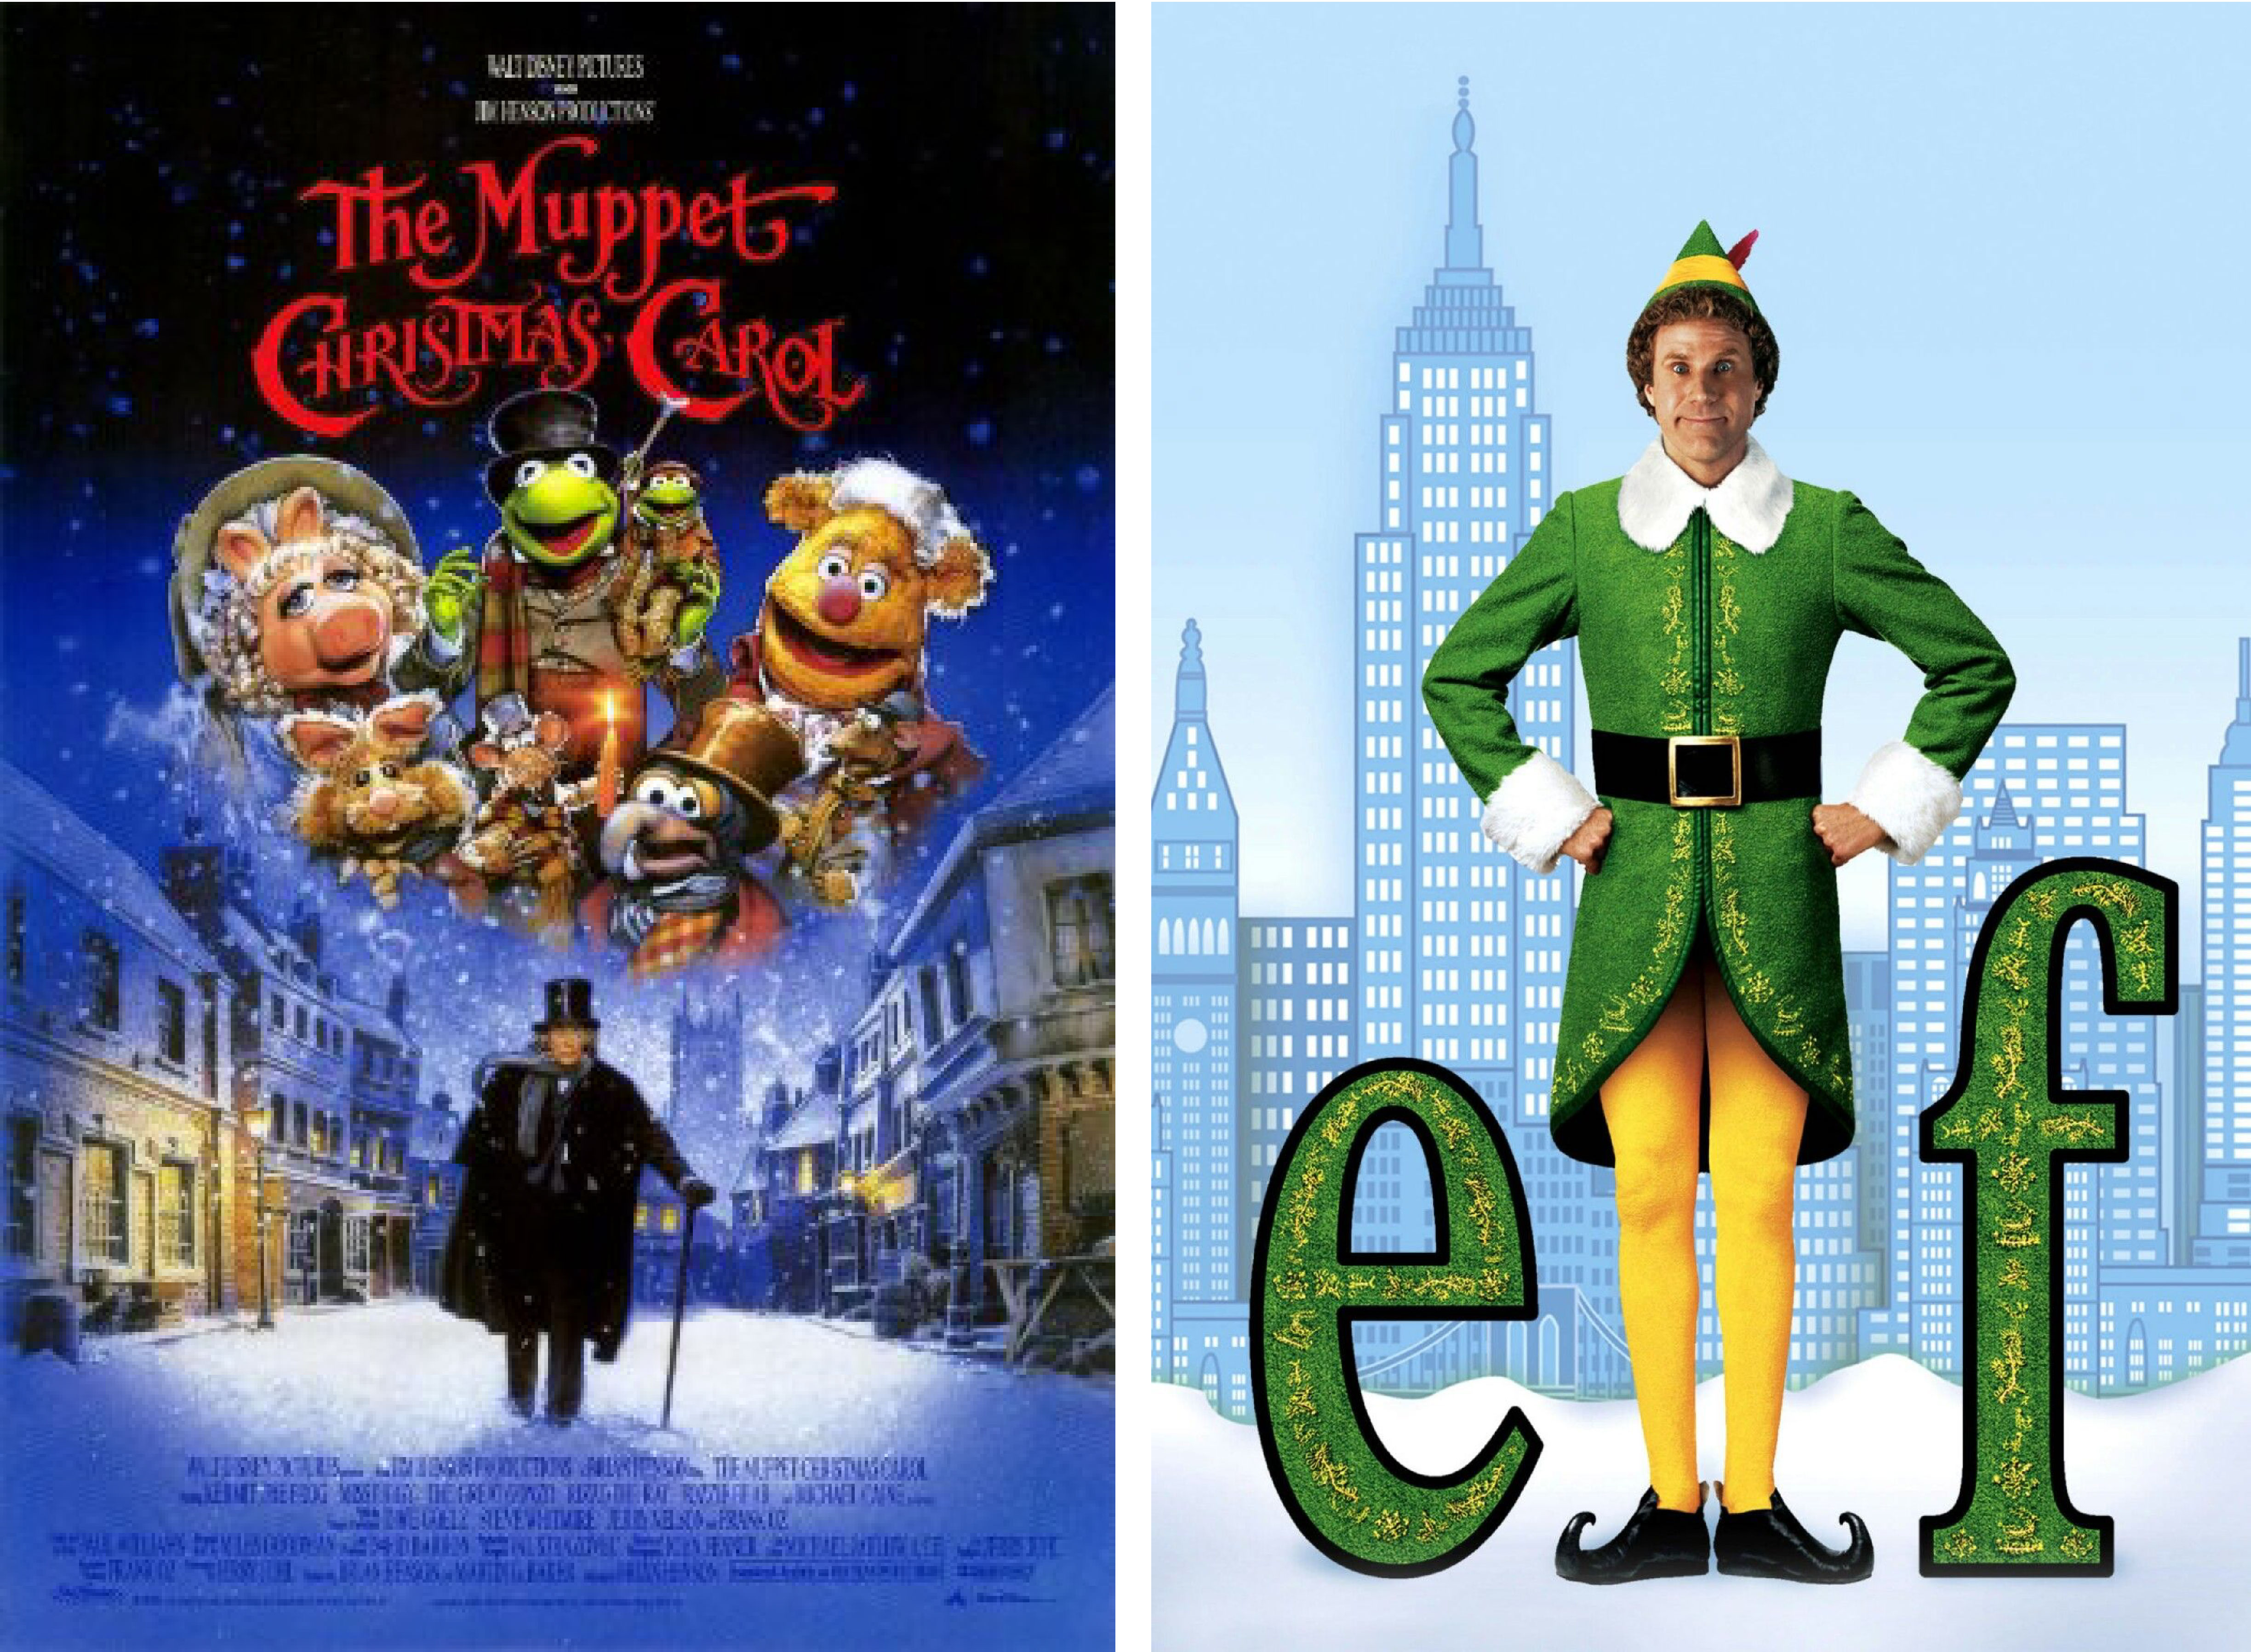 Movie posters for "Muppet Christmas Carol" and "Elf" side by side.